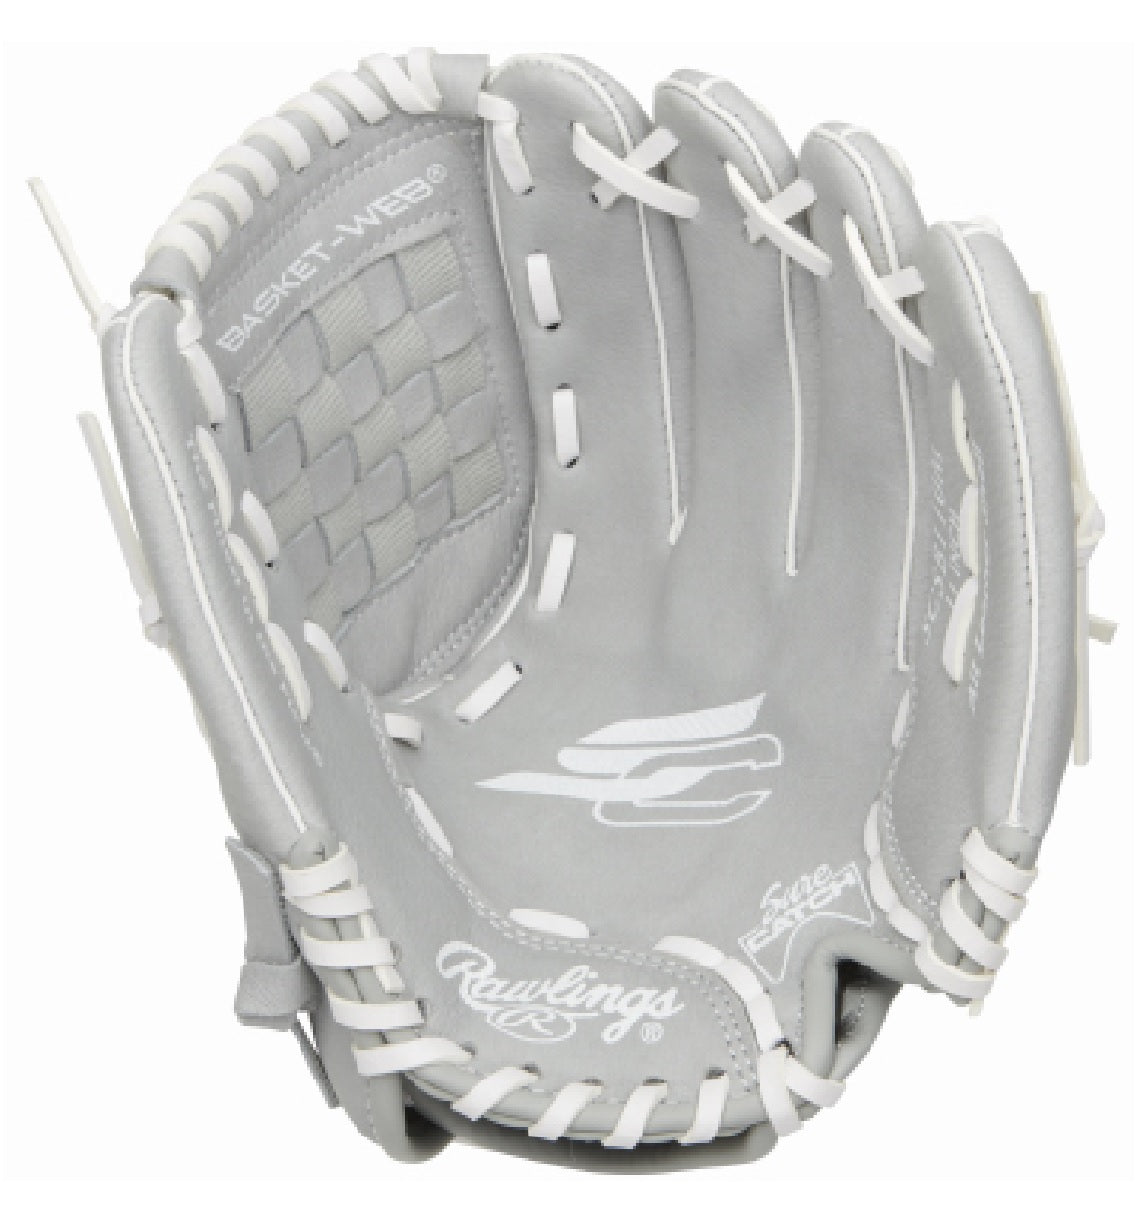 Rawlings SCSB110M-6/0 Sure Catch Series Right Hand Youth Glove, 11 Inch